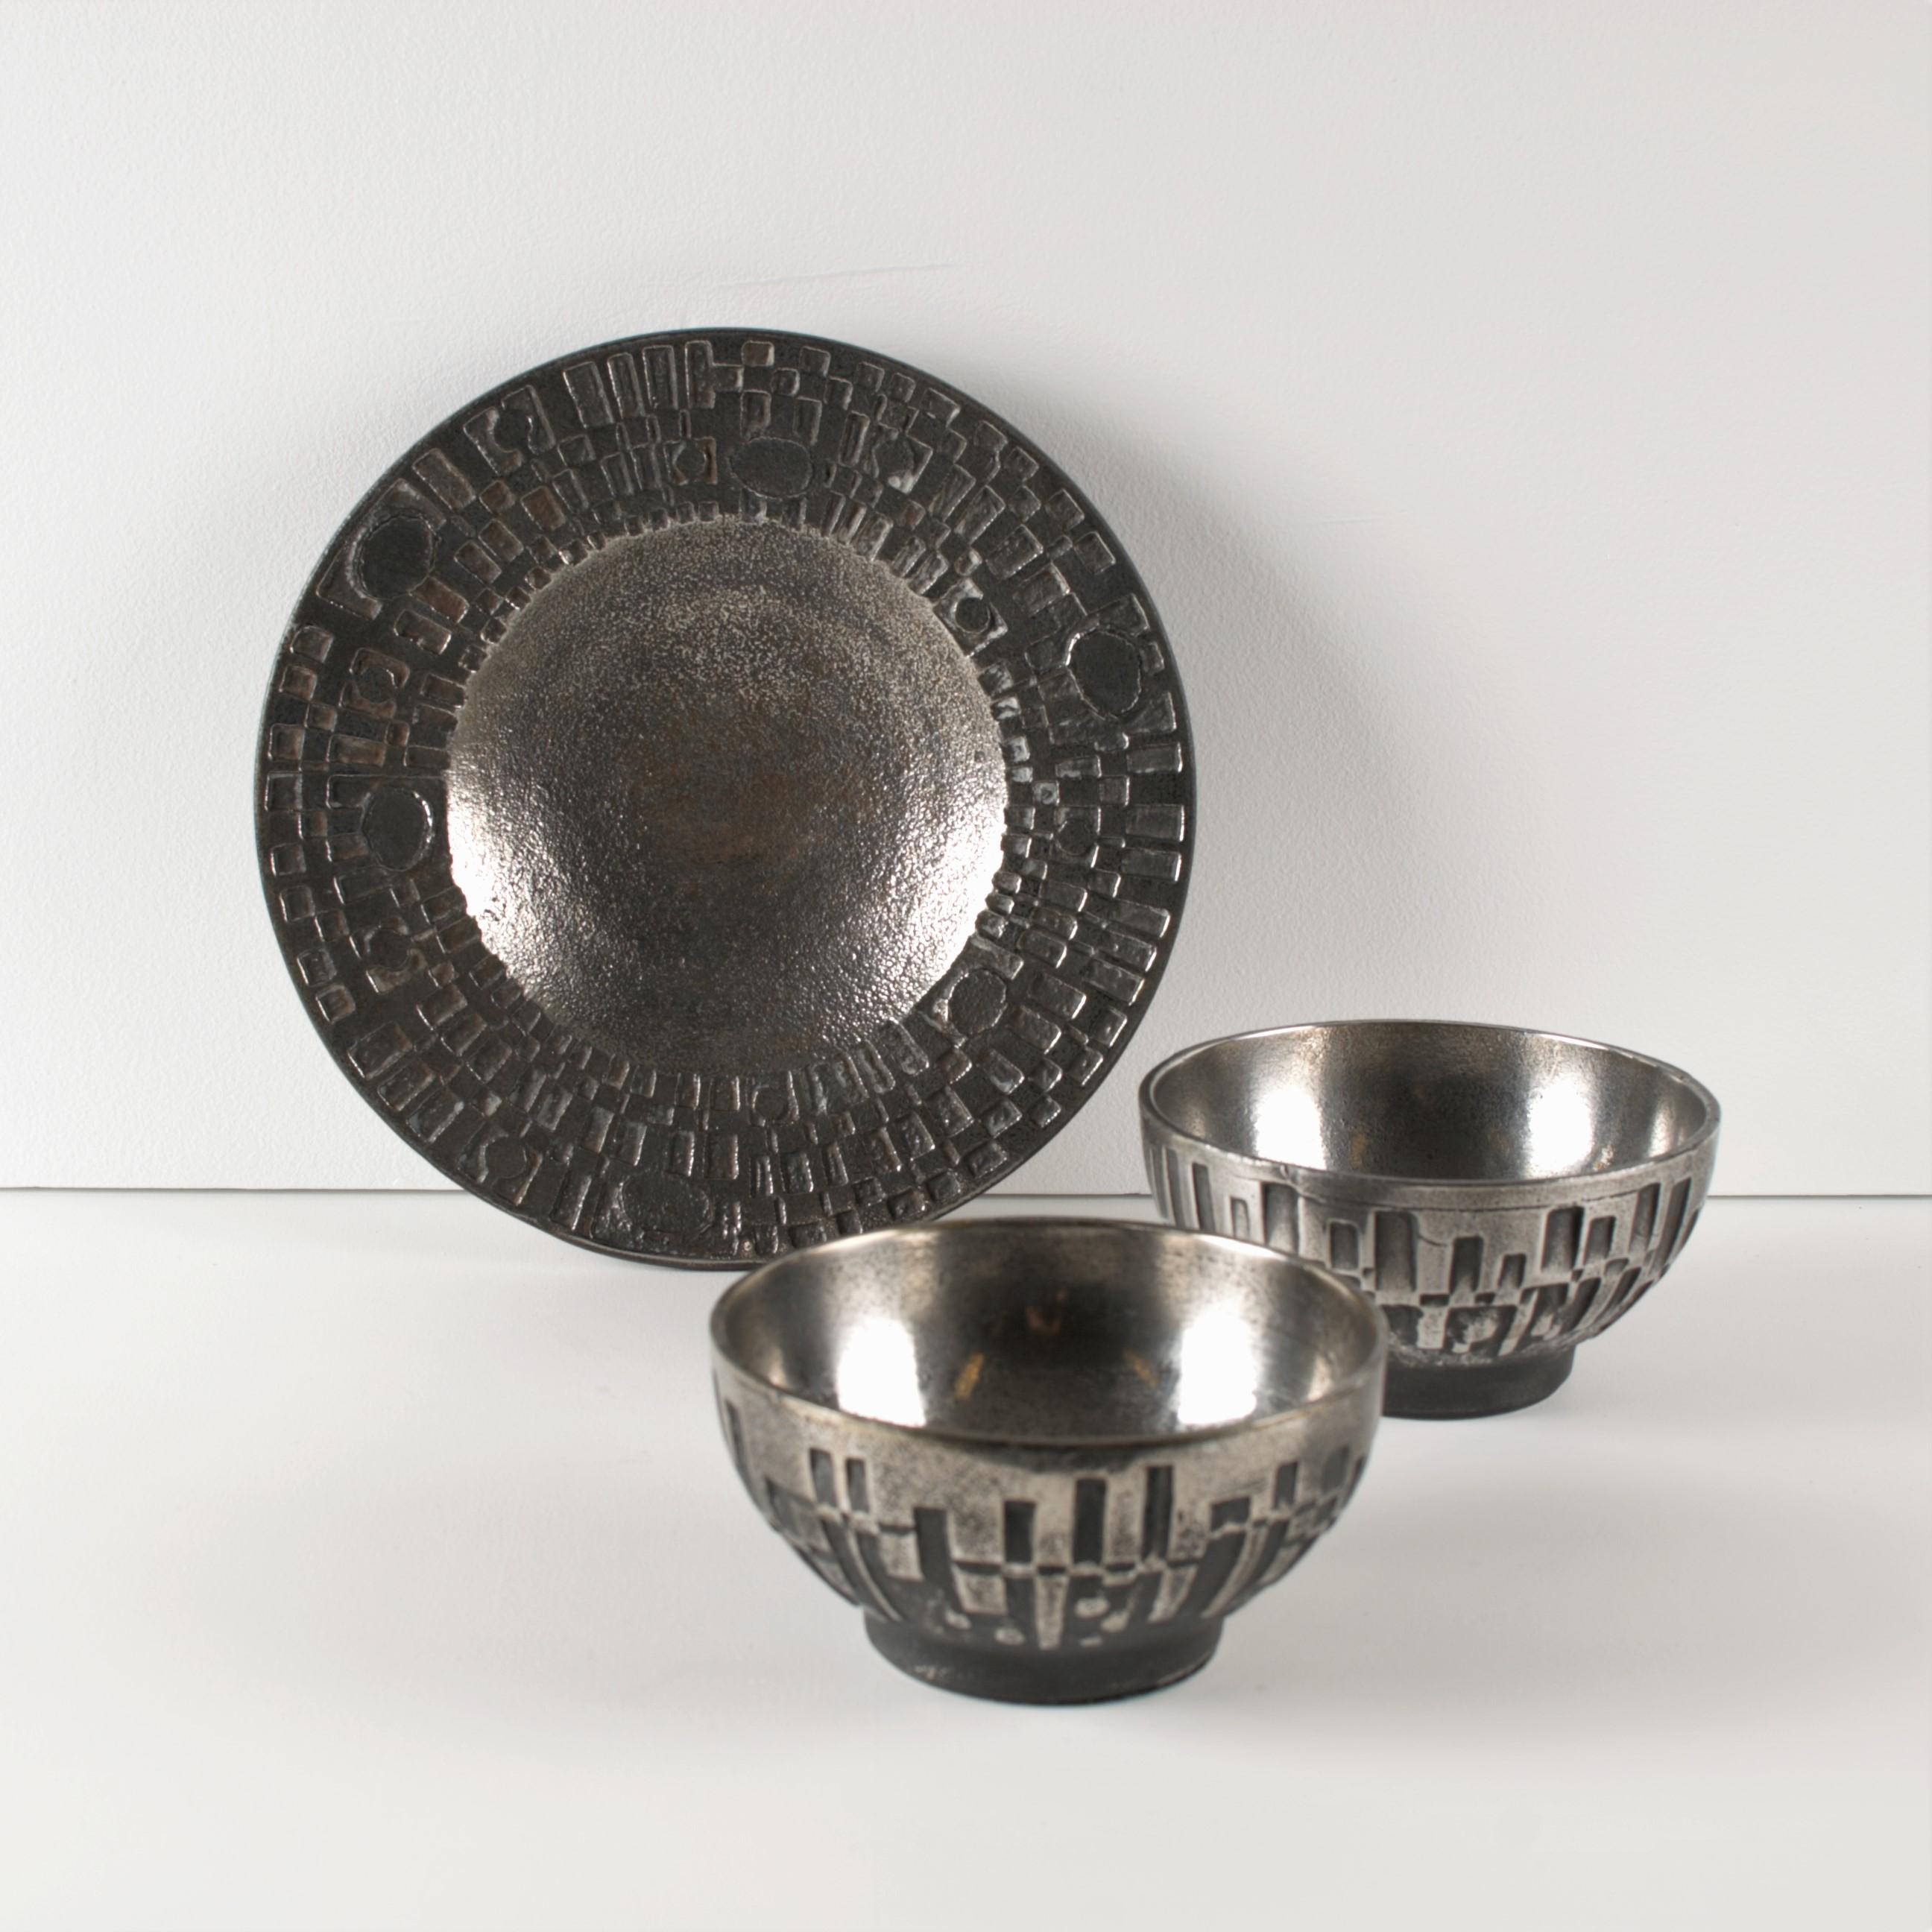 Wonderfully brutalist steel objects formed by kitchen ware steel manufacture Polaris Norway. The 